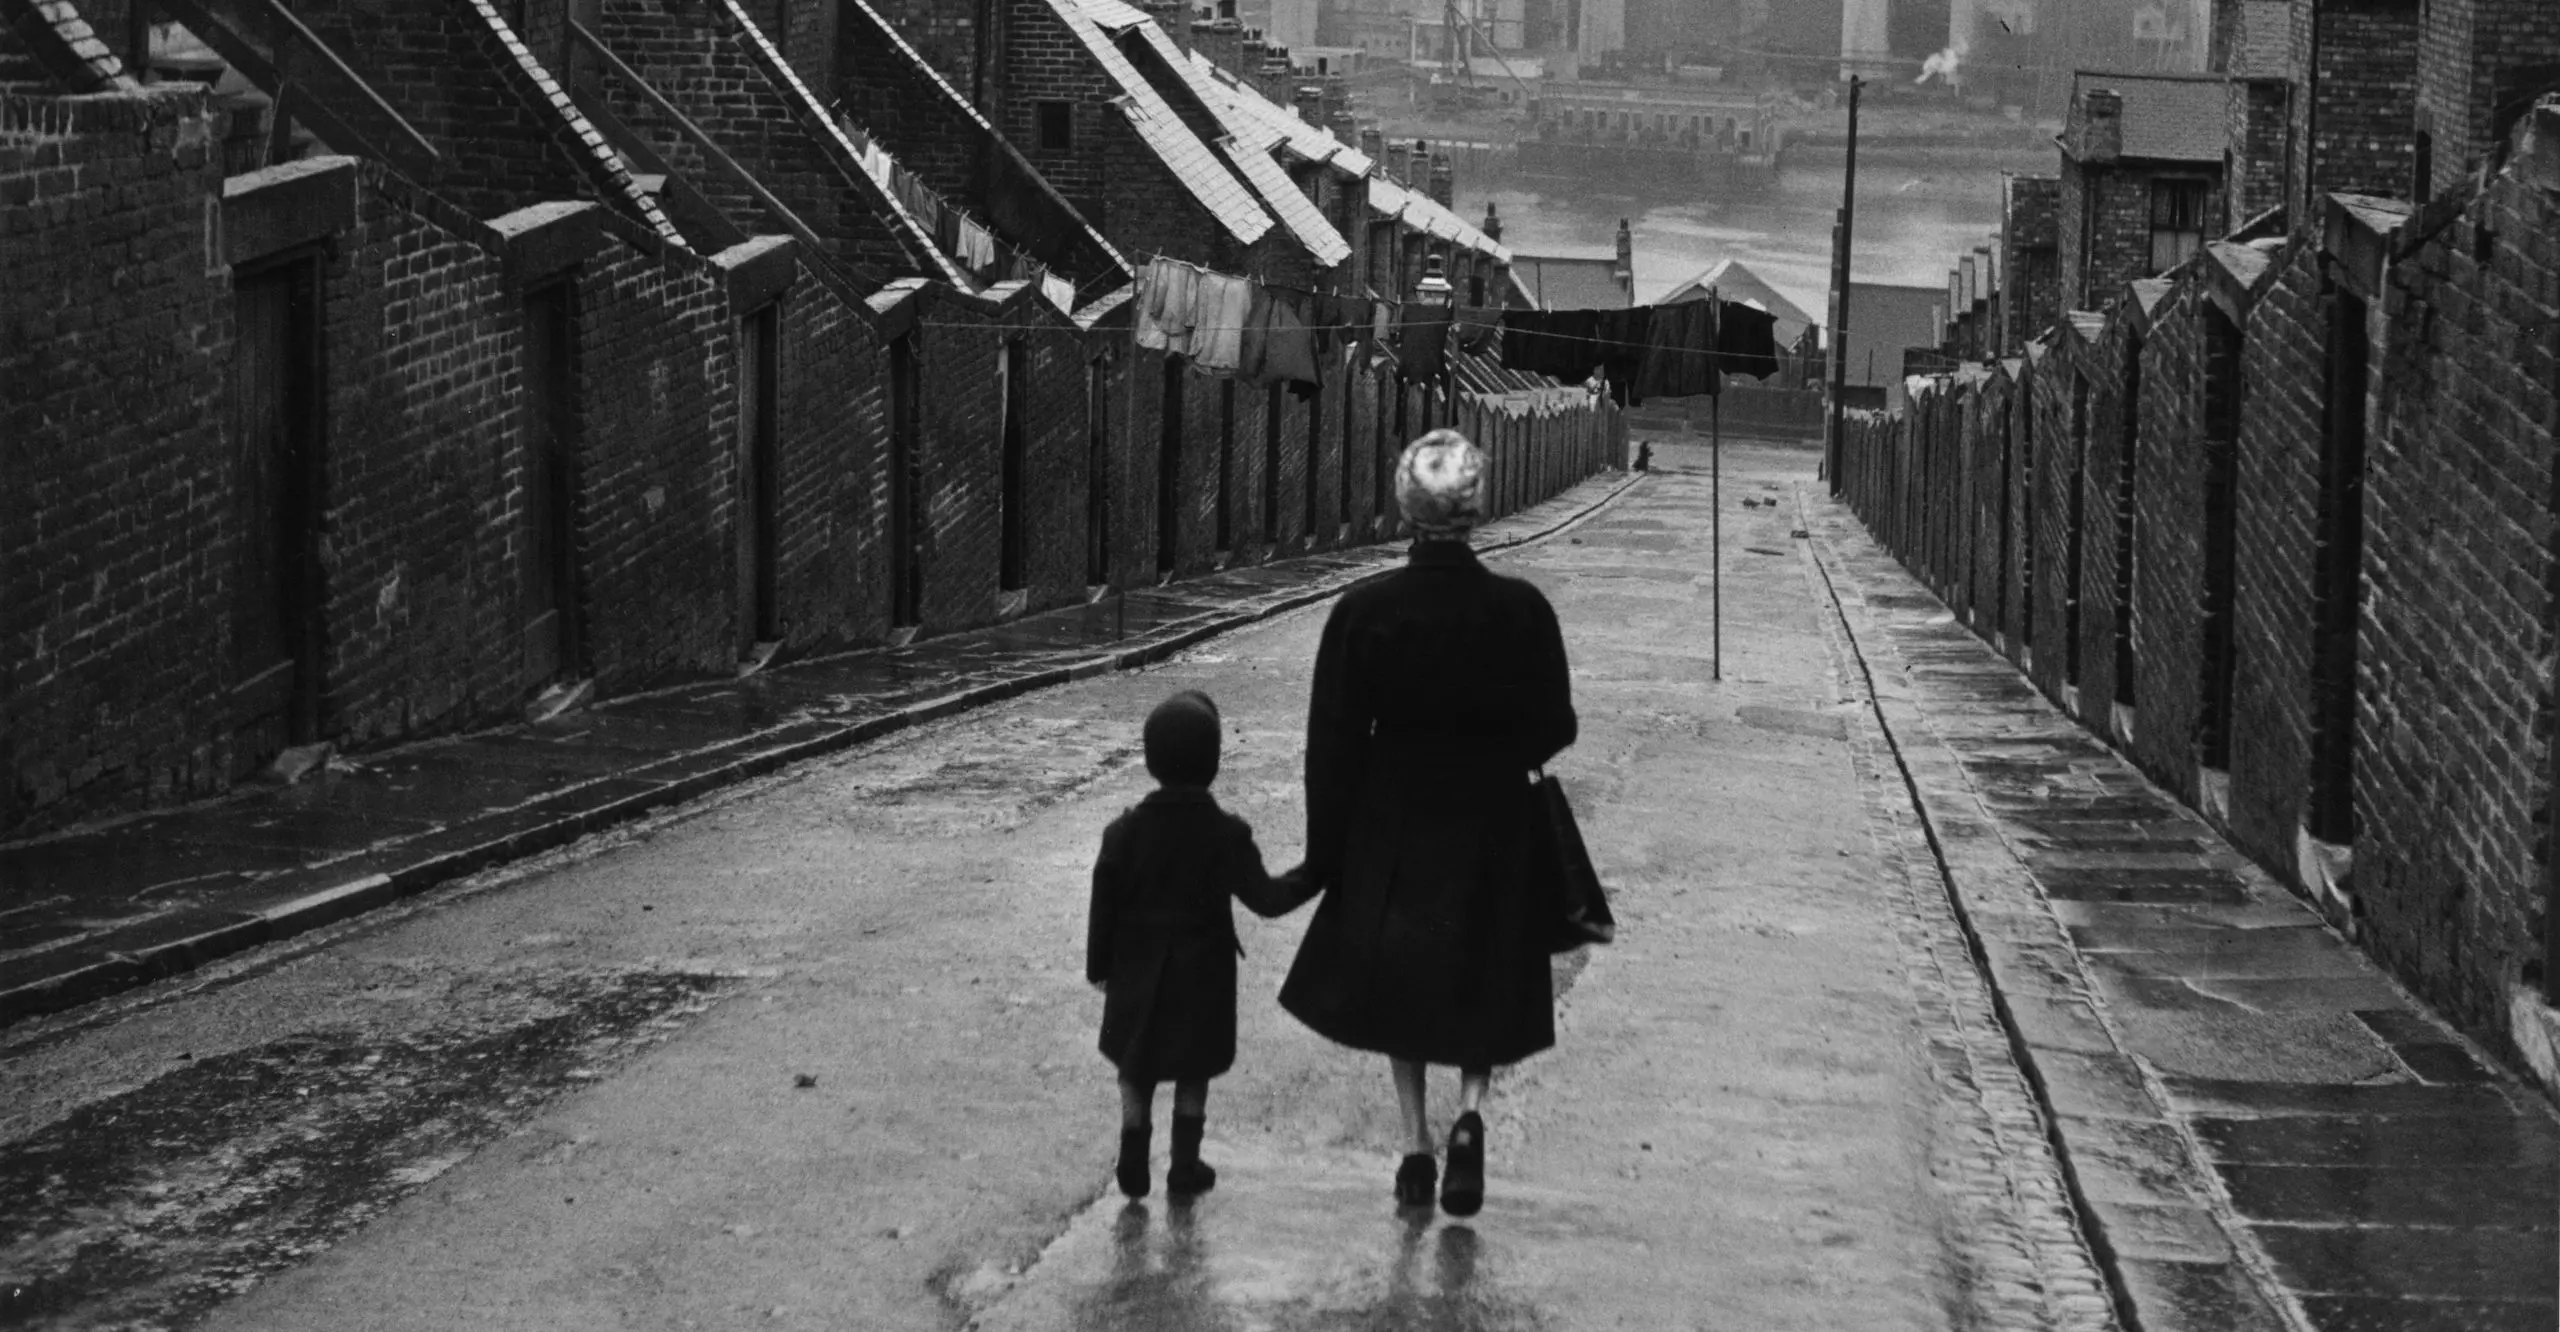 Black and white photo of a woman and child walking down a residential street.